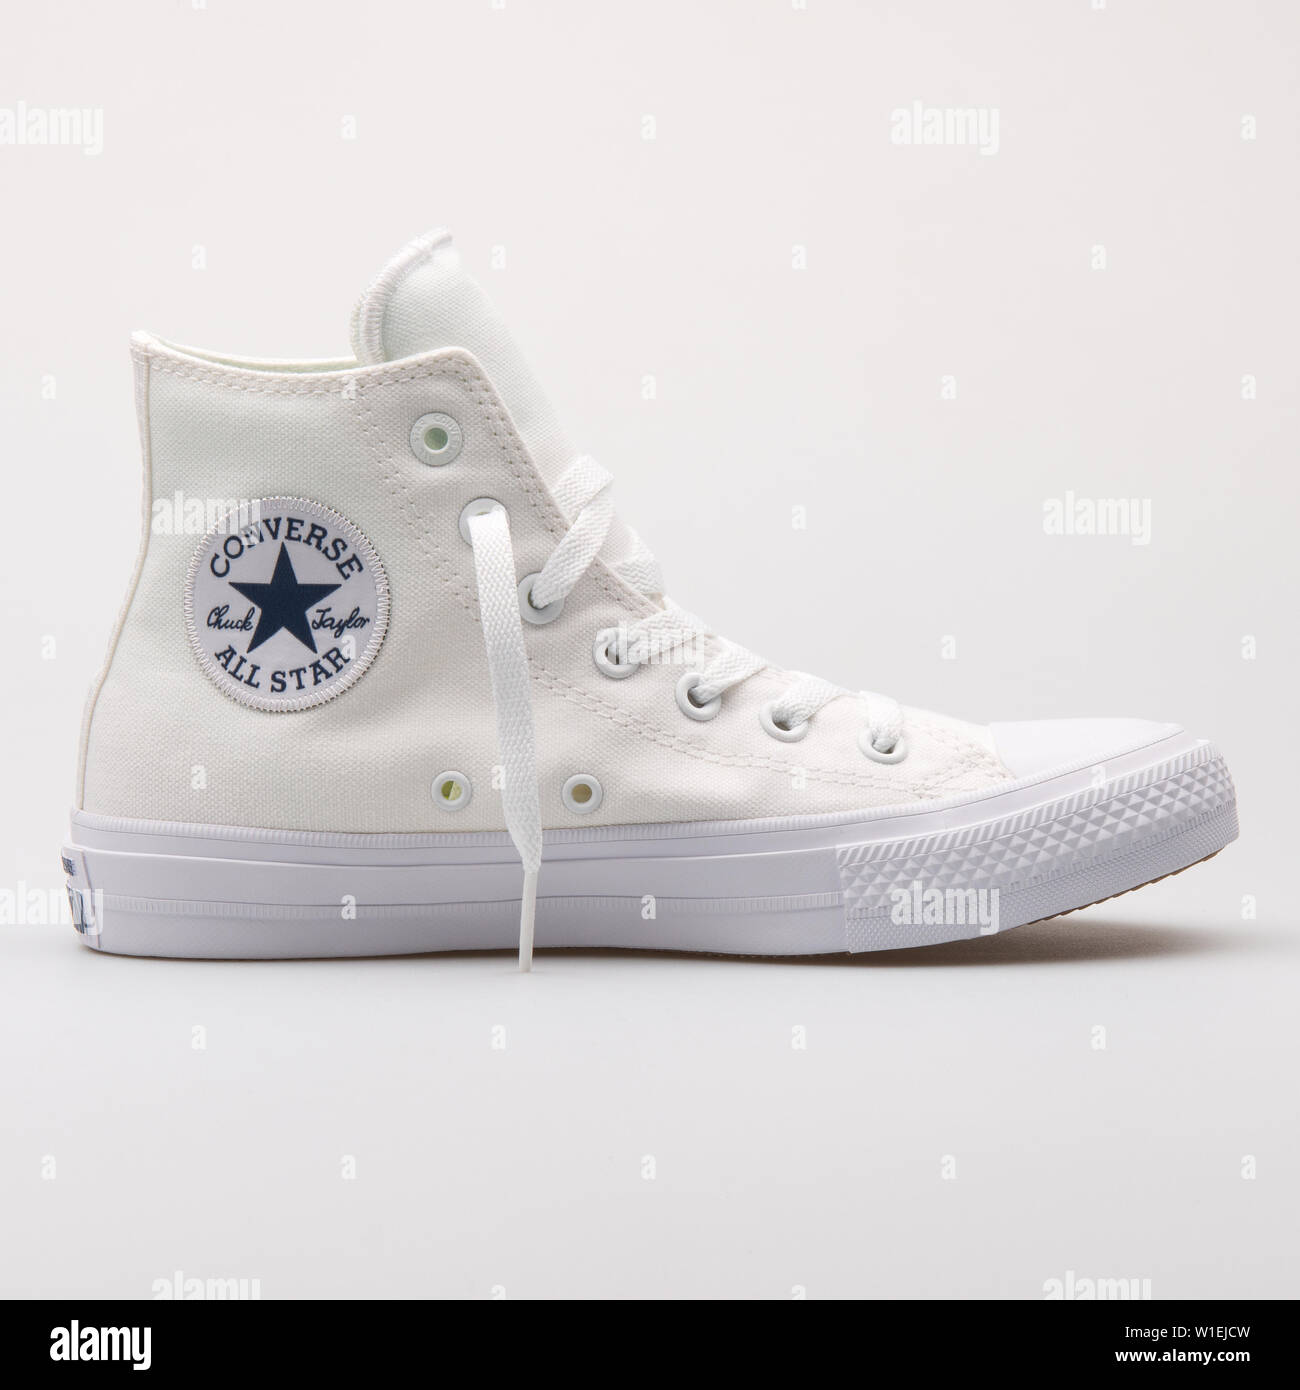 VIENNA, AUSTRIA - AUGUST 23, 2017: Converse Chuck Taylor All Star 2 High  white sneaker on white background Stock Photo - Alamy